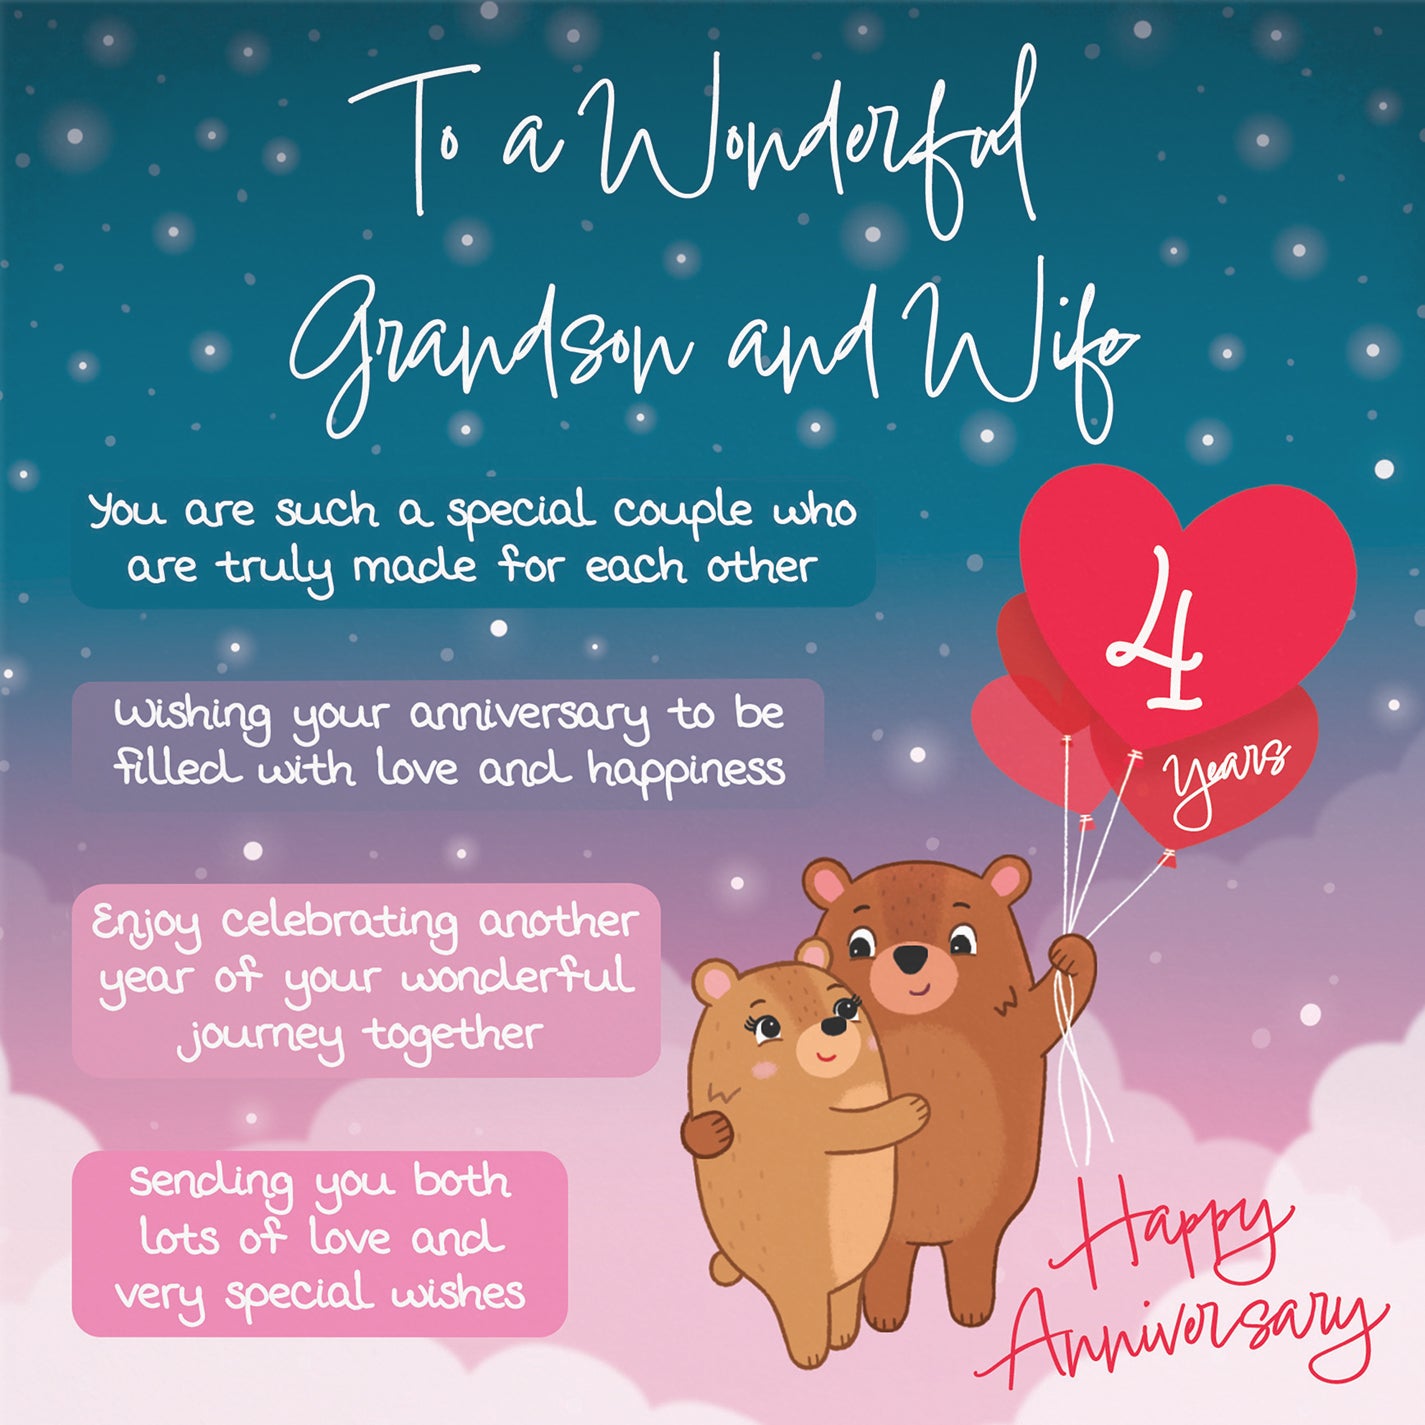 Grandson And Wife 4th Anniversary Card Starry Night Cute Bears